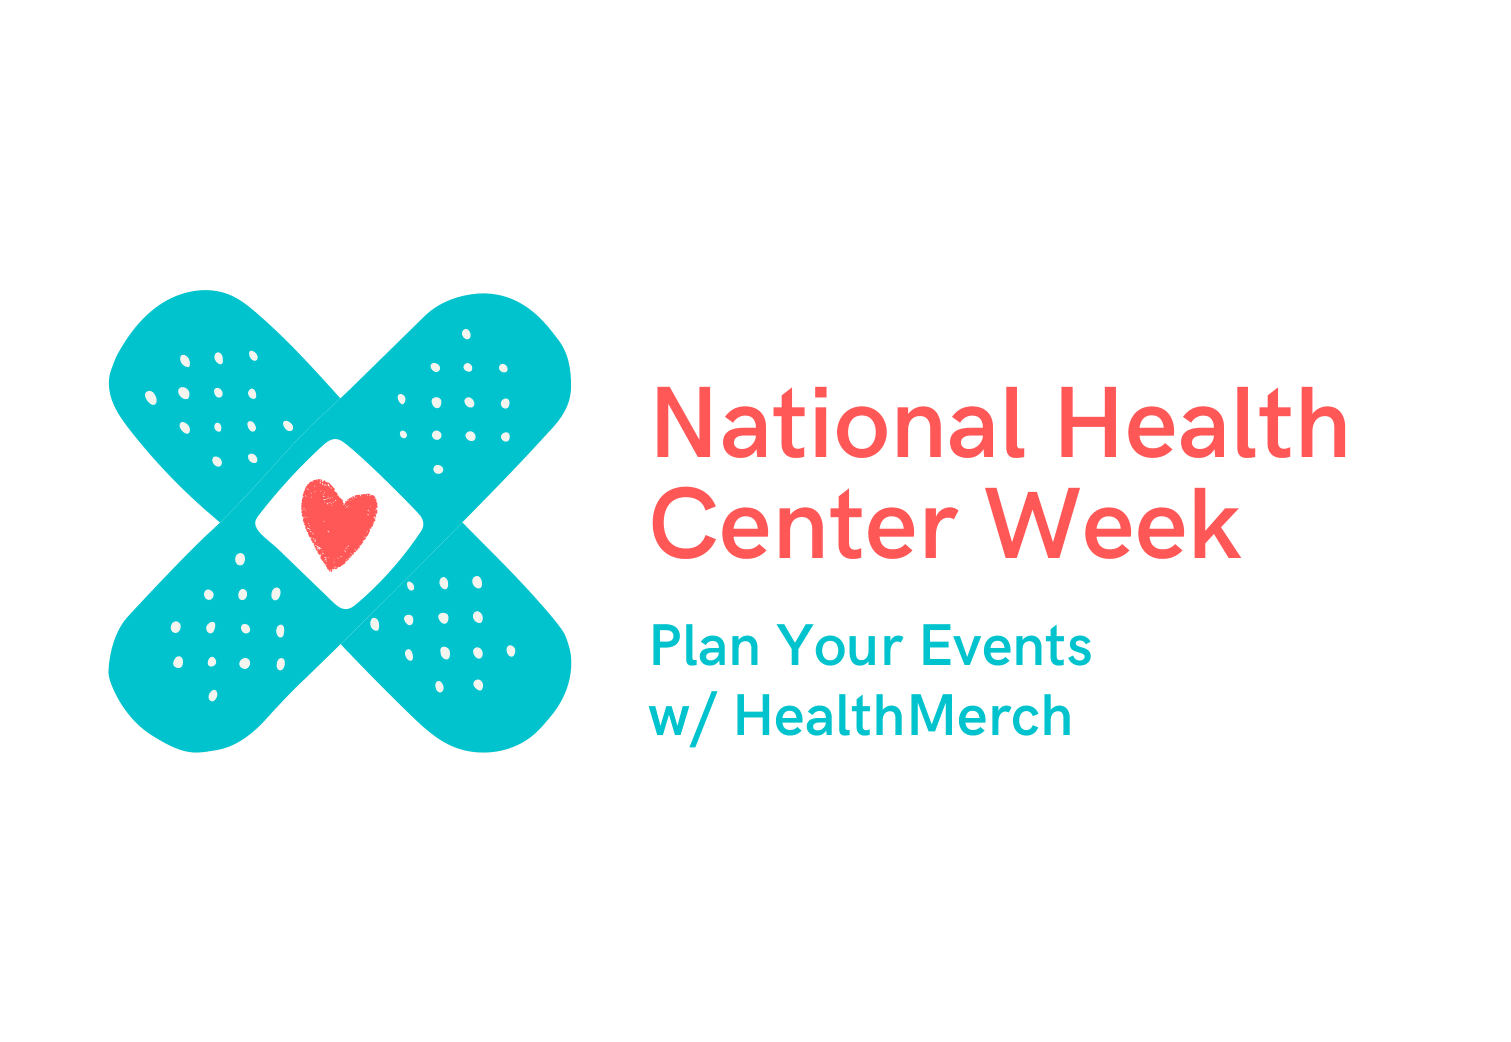 National Health Center Week Events